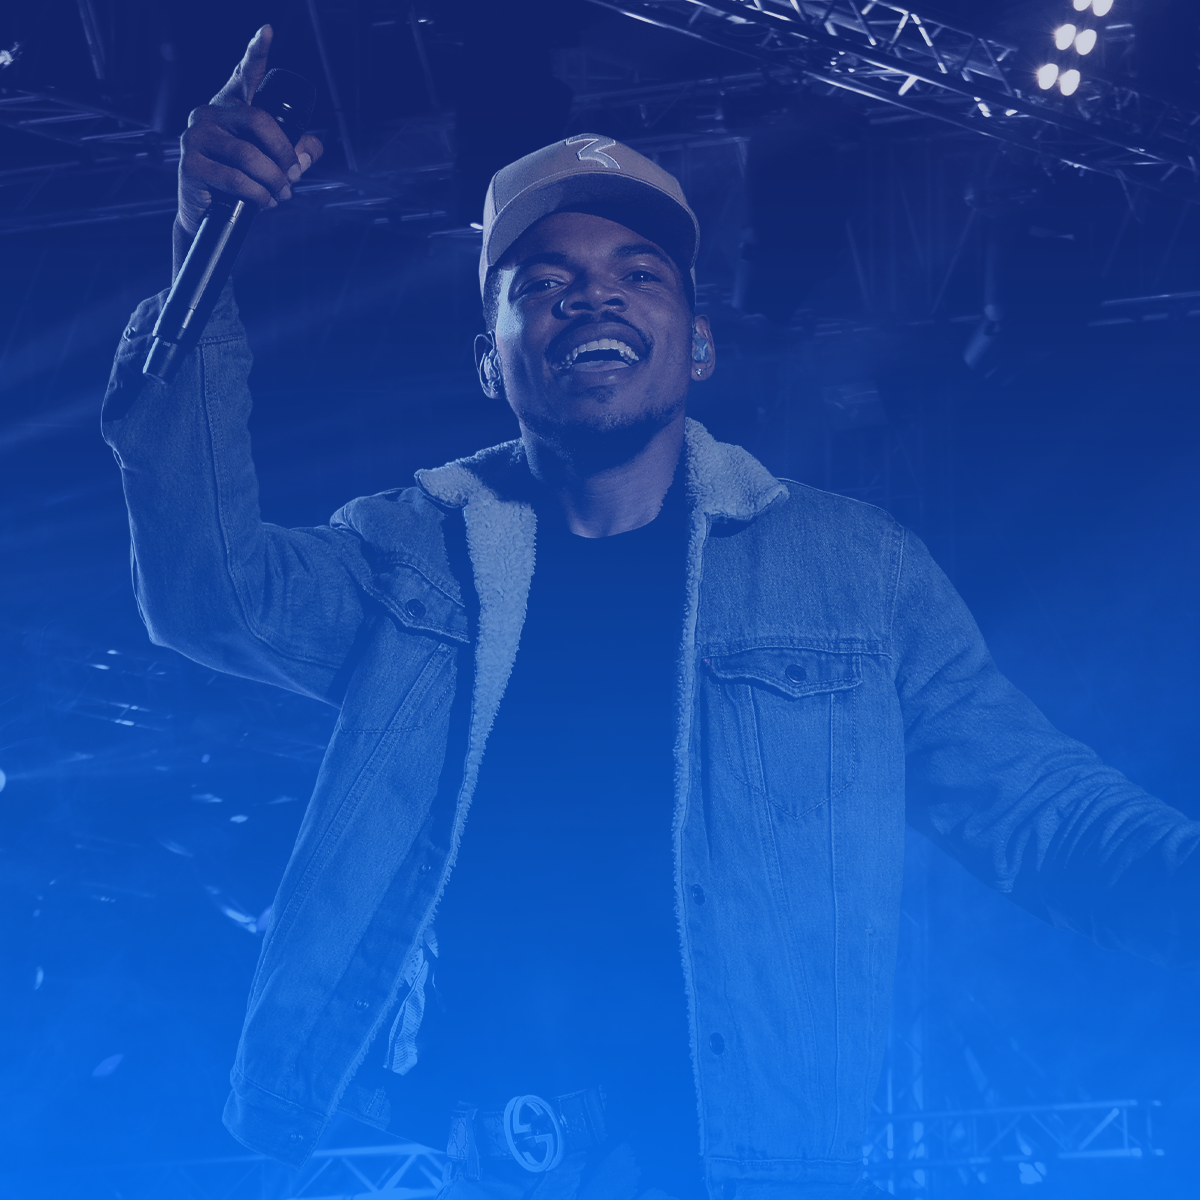 Buy Chance The Rapper Tickets! | TicketNetwork